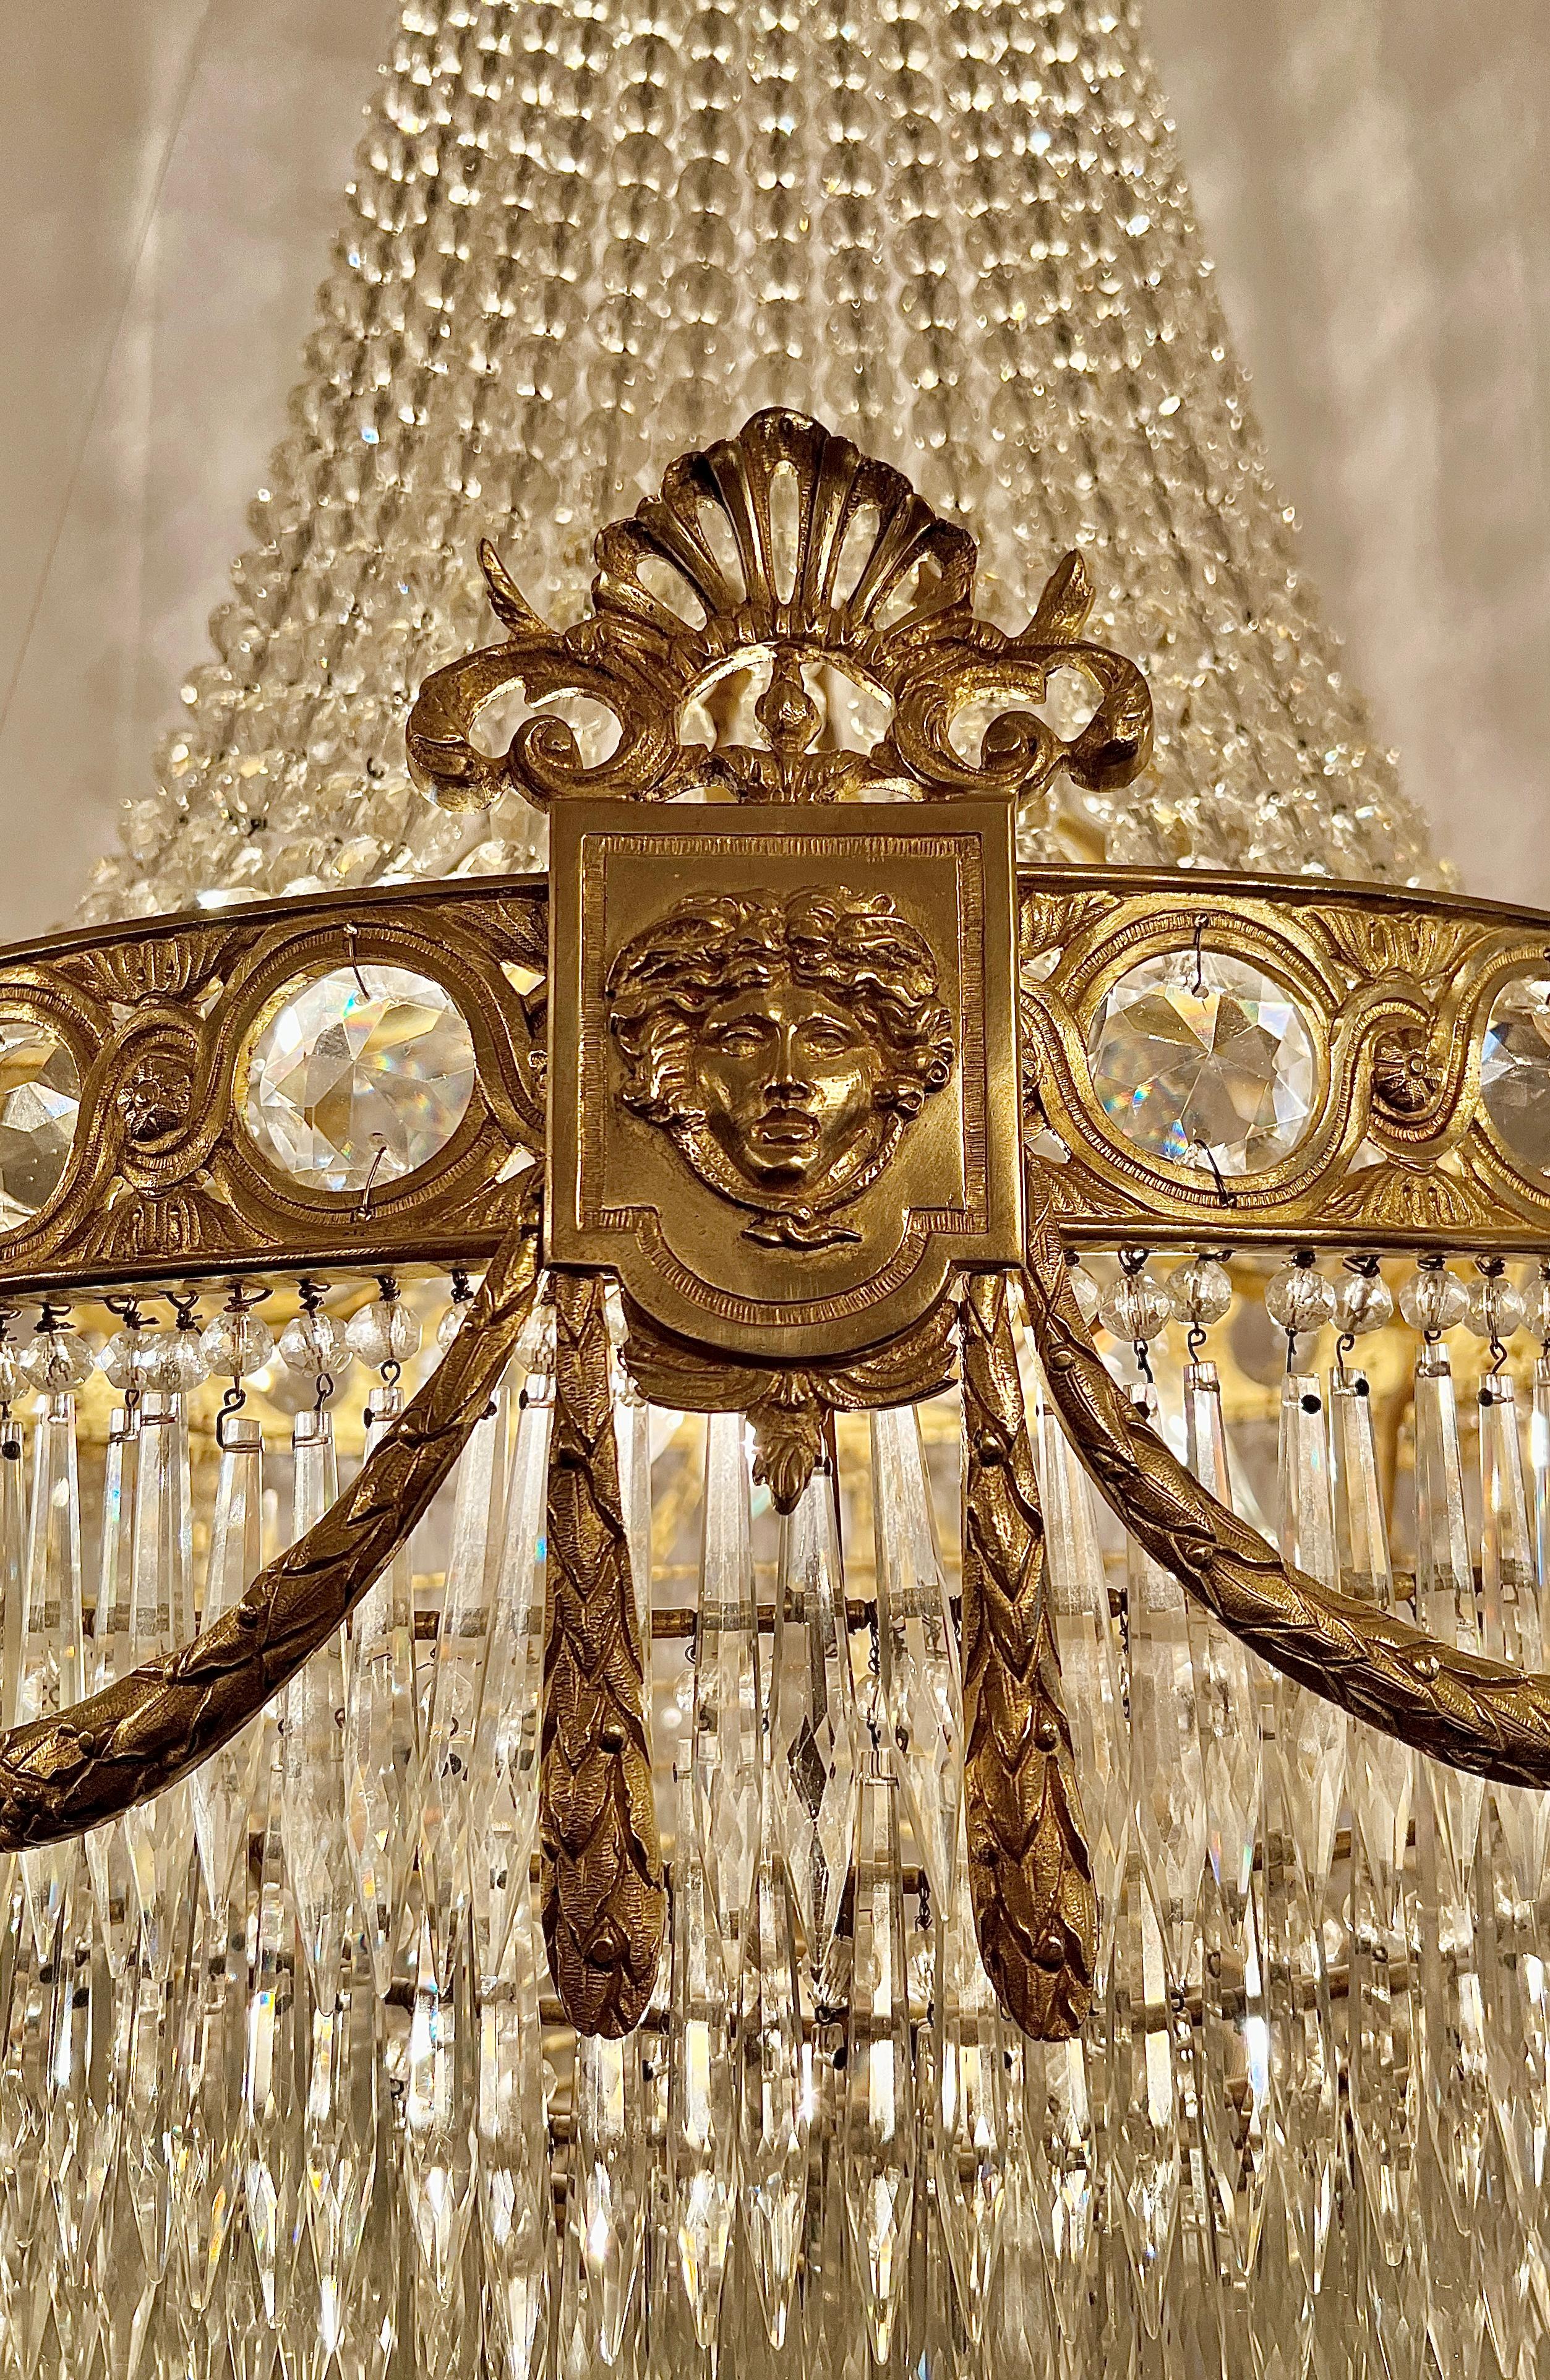 Antique 19th Century French Baccarat Crystal and Ormolu Chandelier, Circa 1890's.